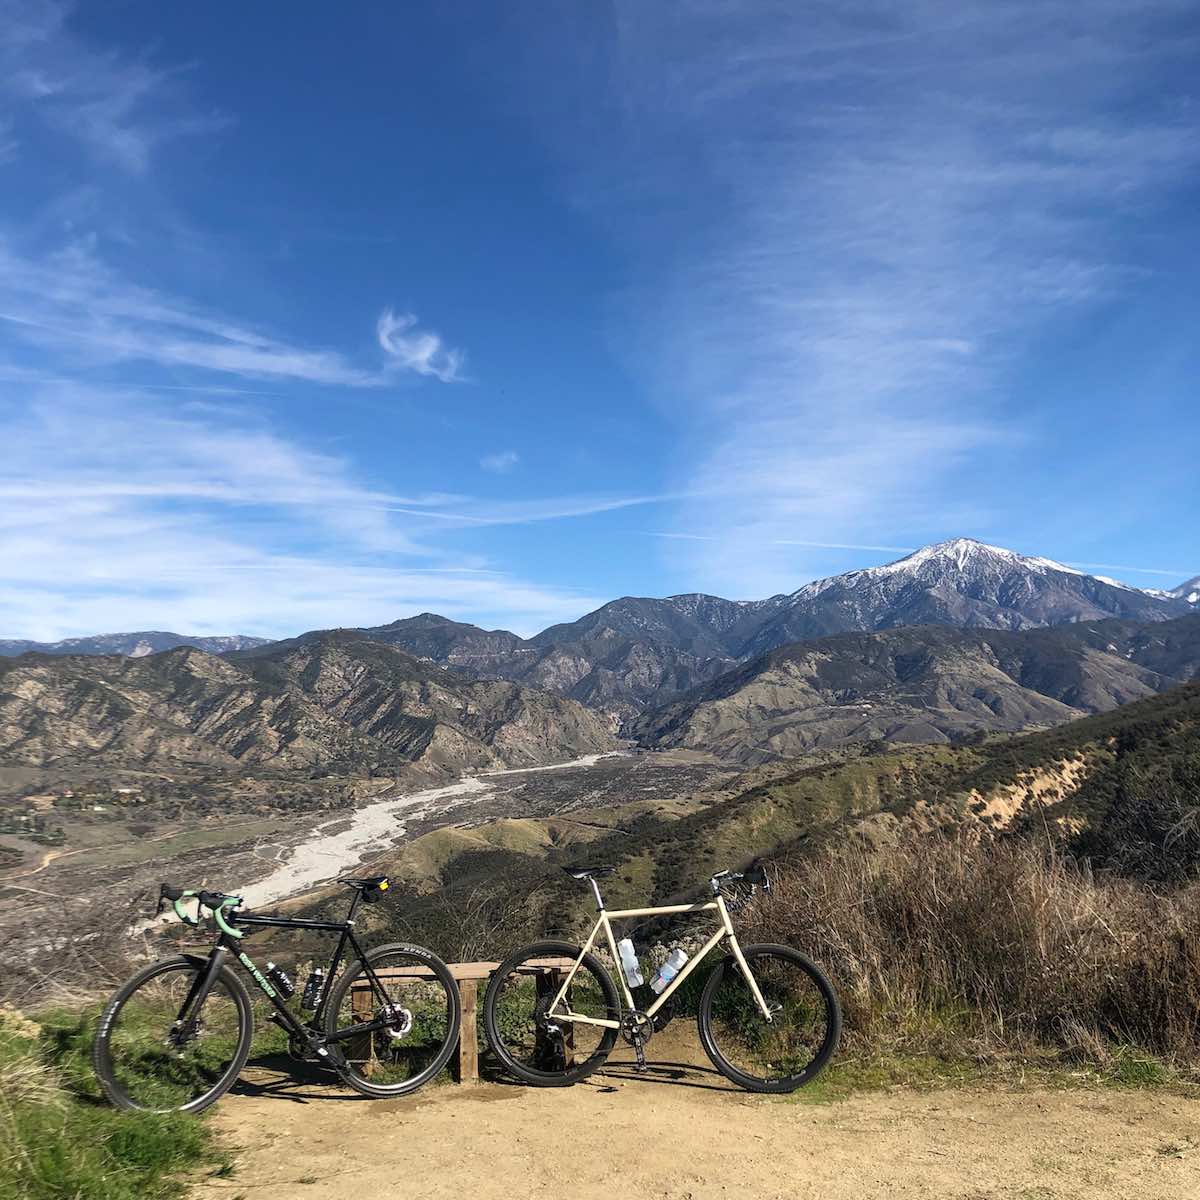 Bikerumor pic of the day winter in southern california two bicycles posed on a dirt path looking out over expansive mountains no snow in sight.